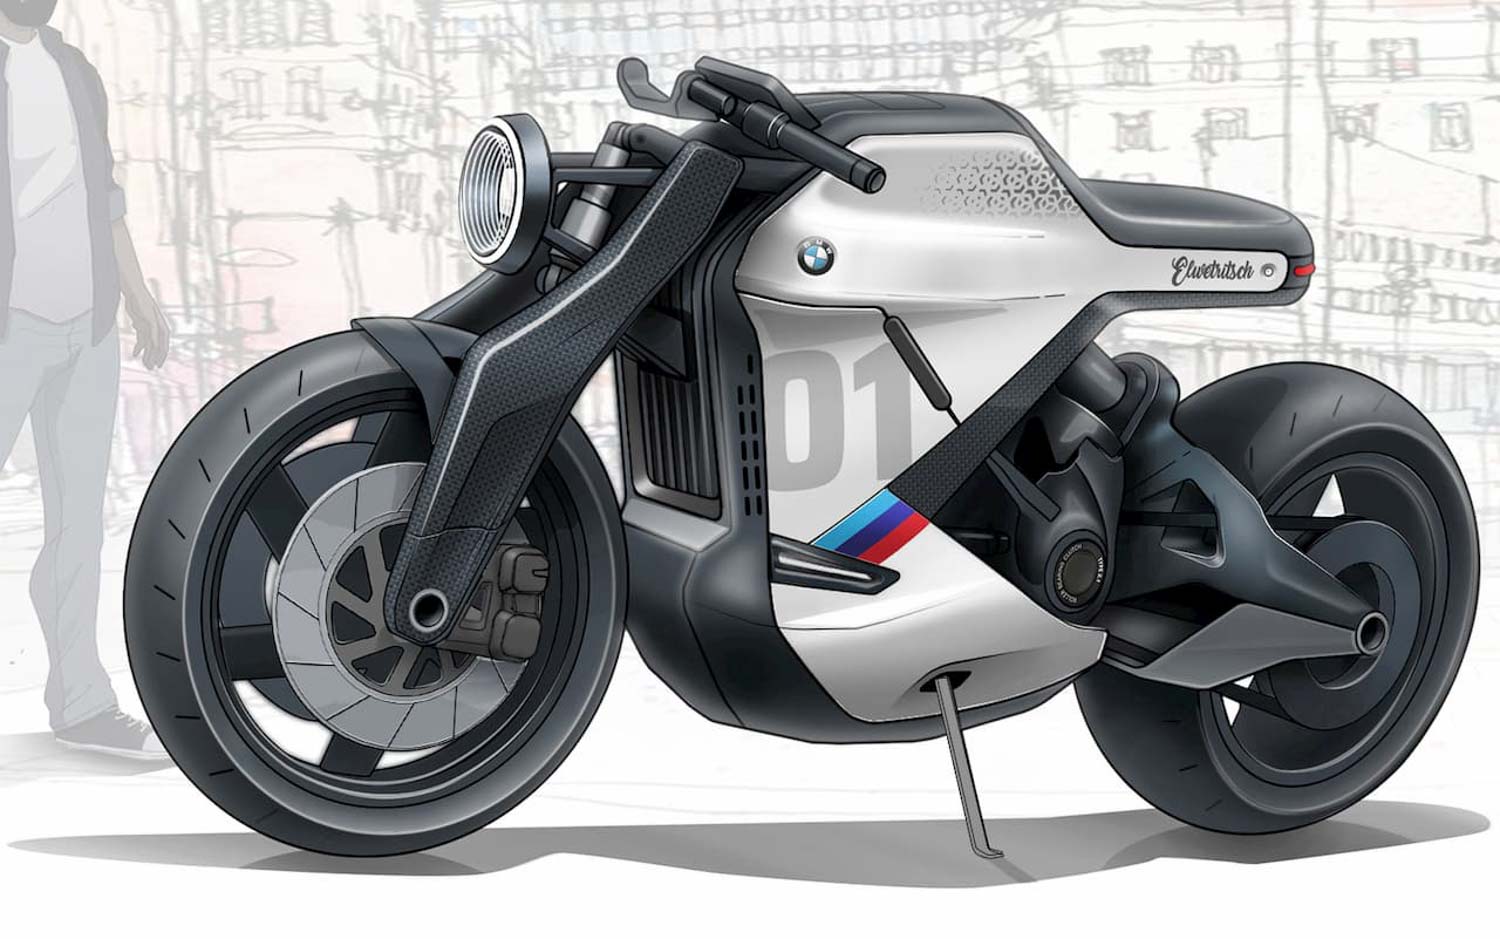 This BMW AllElectric Cafe Racer Rendering Looks Futuristic